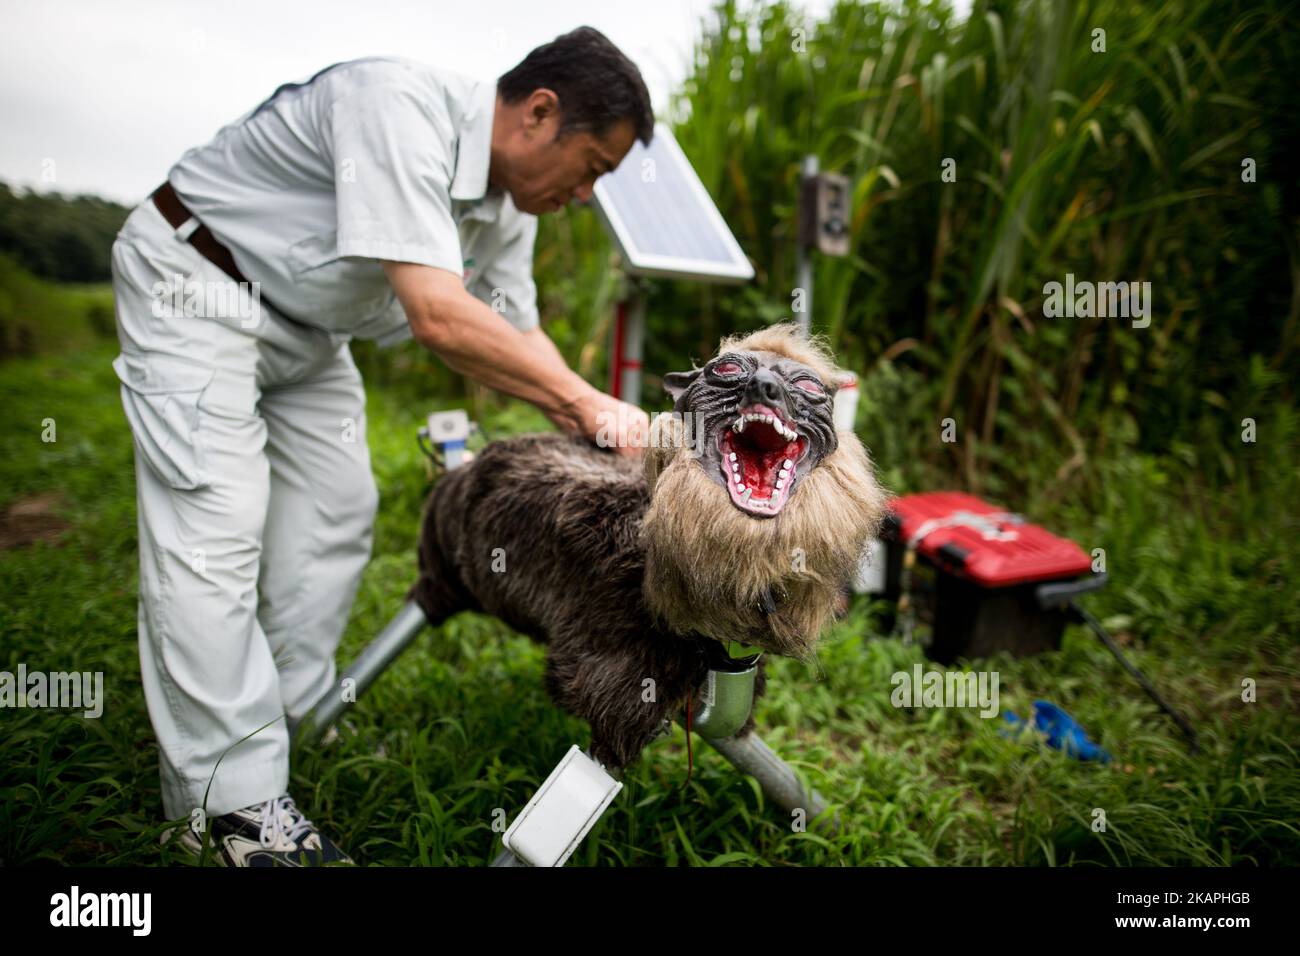 Members of JA Kisarazu-shi, shows a robot named 'Super Monster Wolf' a solar powered robot designed to scare away wild animals from farmer’s crops in Kisarazu, southwestern Chiba Prefecture, Japan on August 10, 2017. (Photo by Richard Atrero de Guzman/NUR Photo) *** Please Use Credit from Credit Field *** Stock Photo